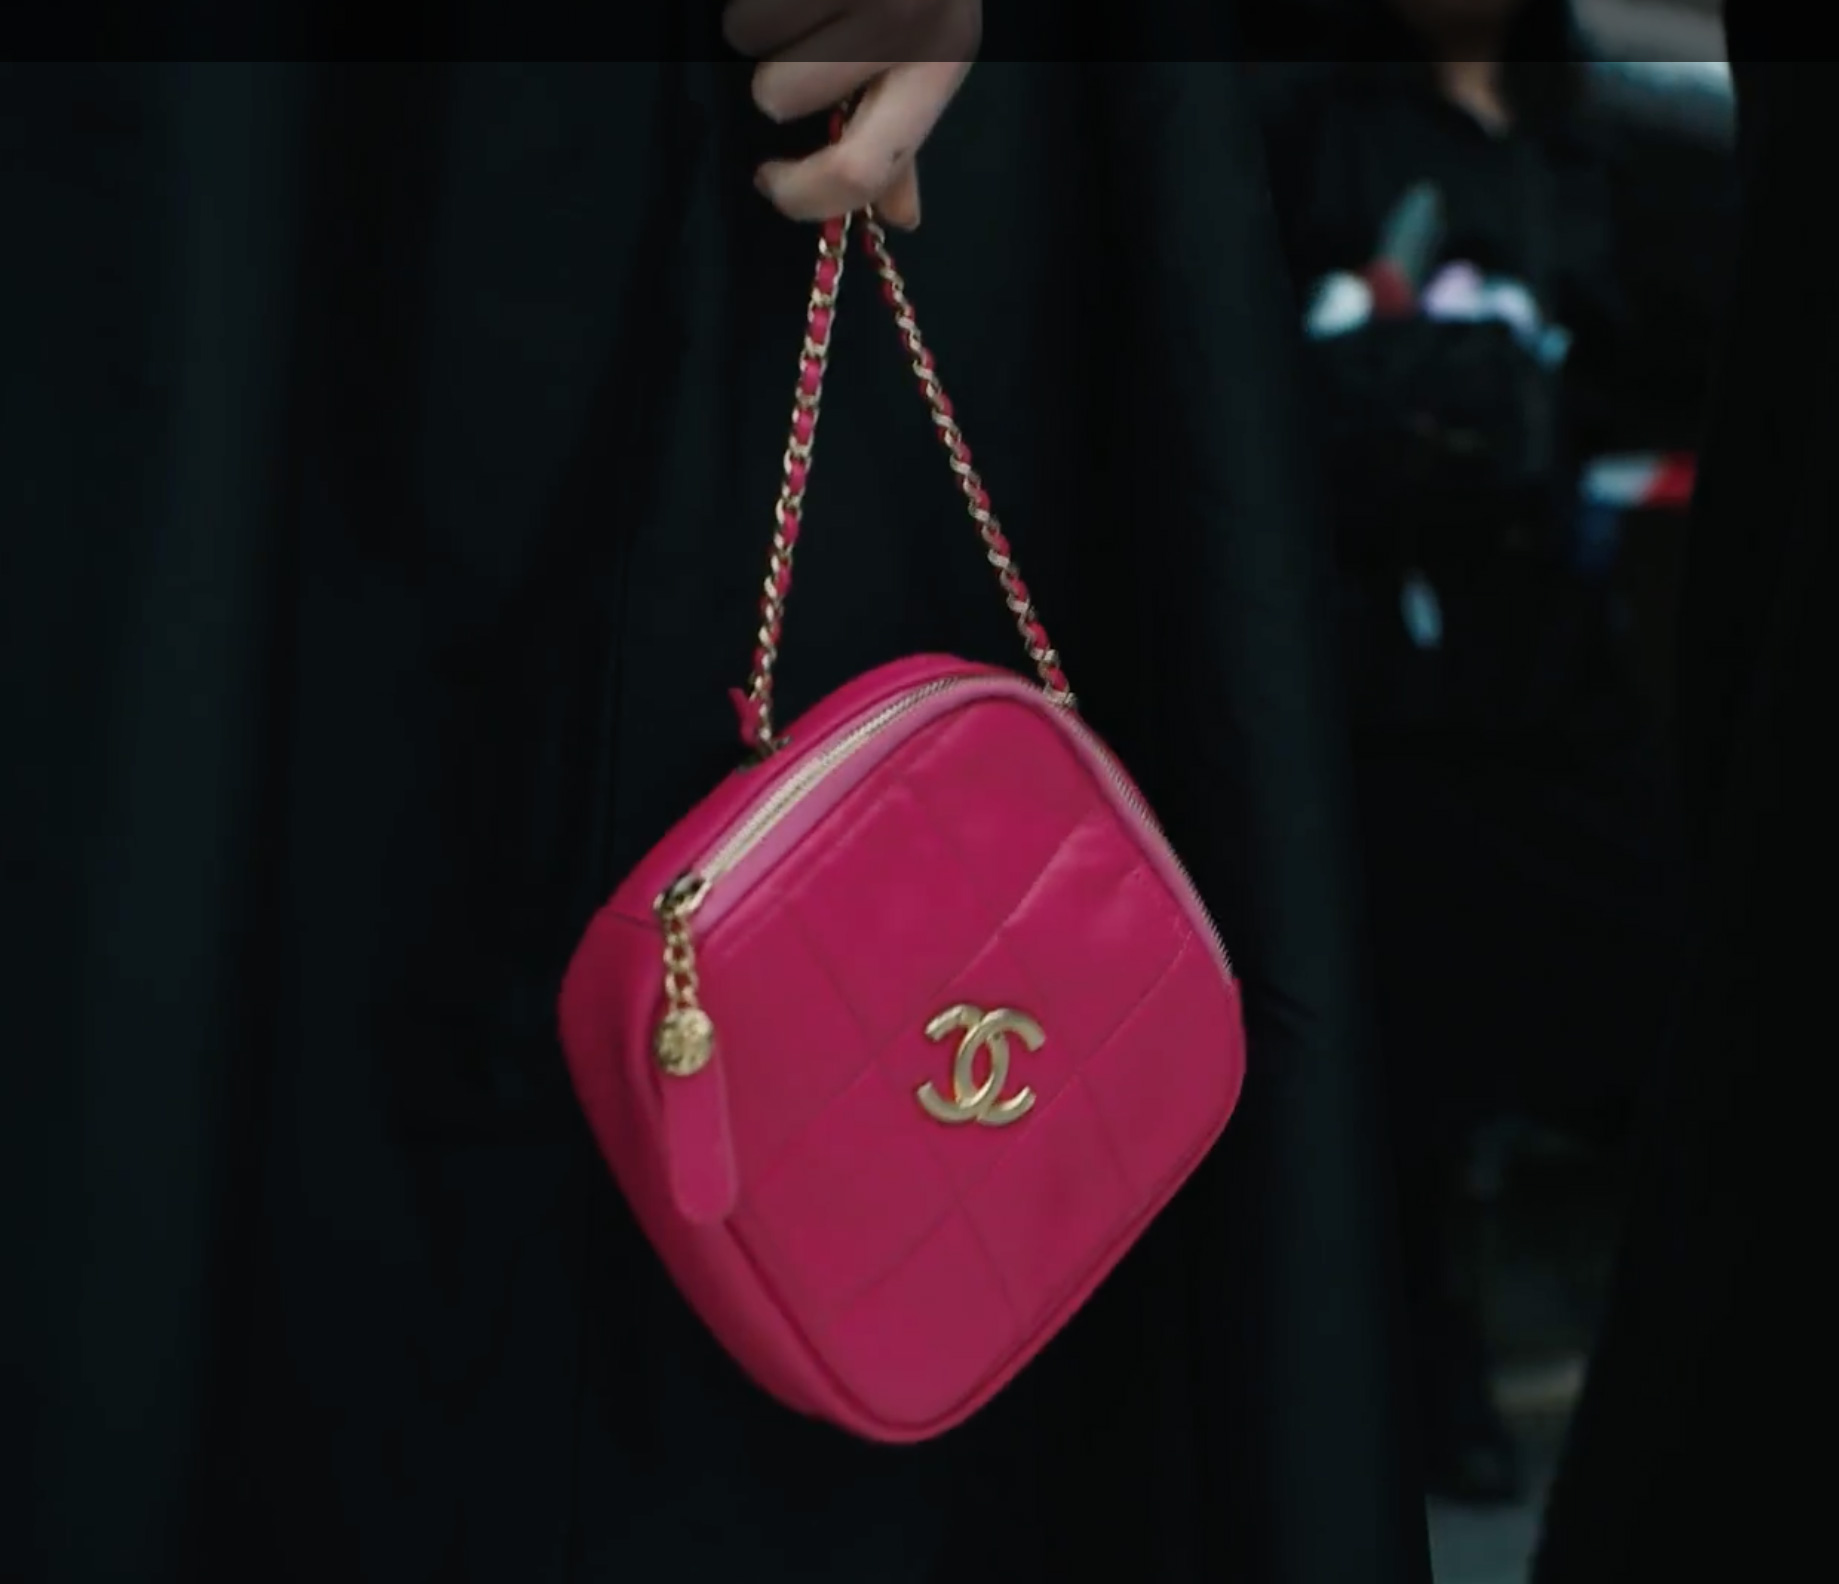 Chanel Fall Winter 2020 Preview Part 2